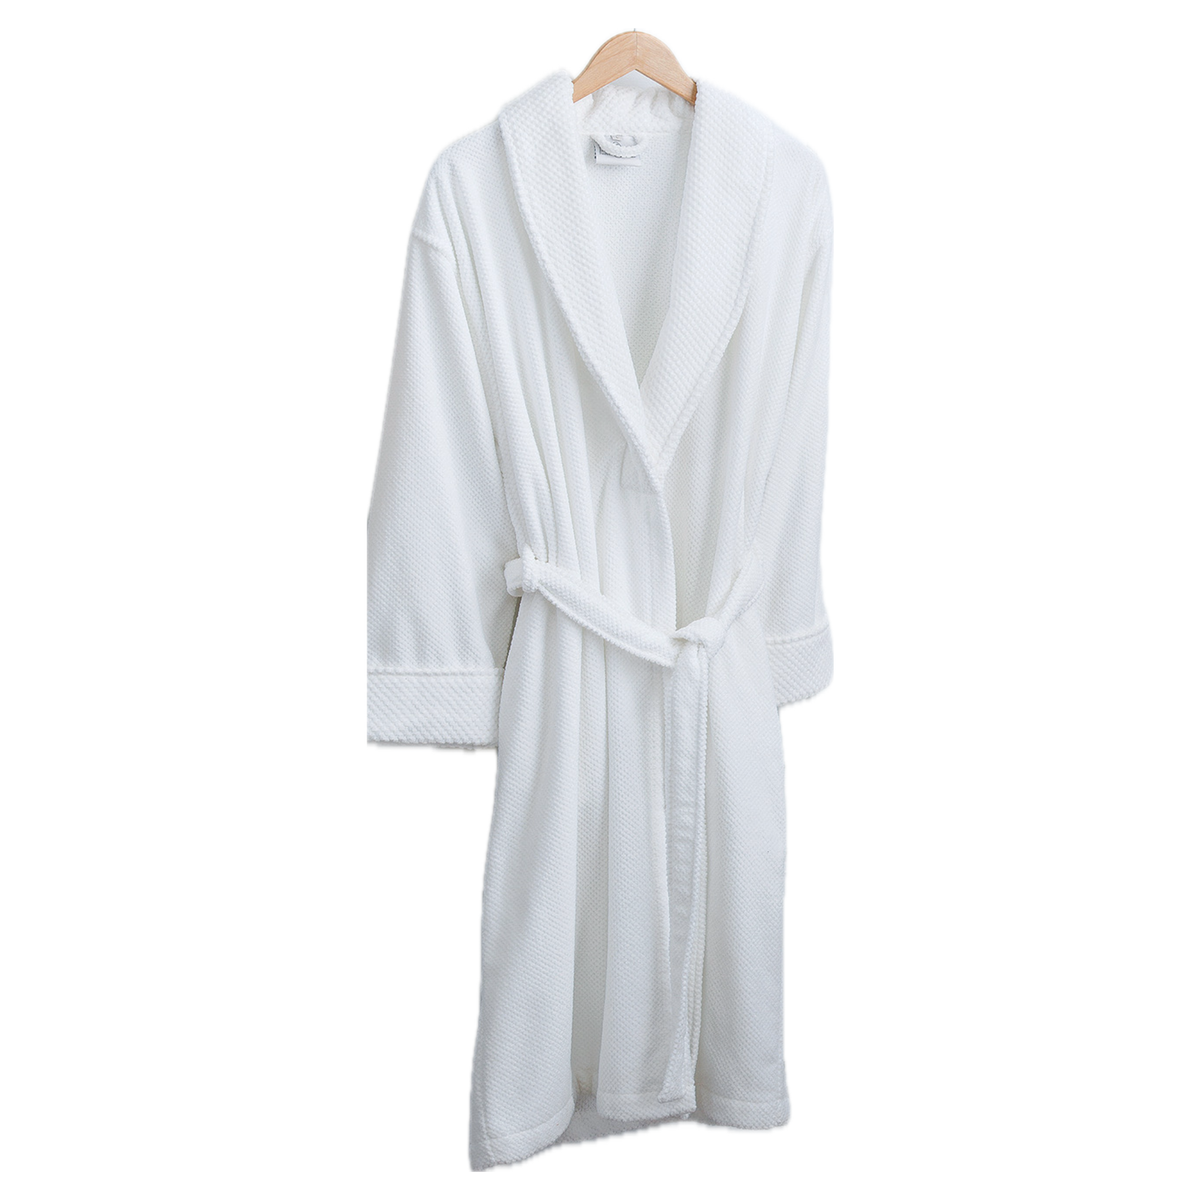 Downtown Company Spa Collection Velour Bathrobe against White Background